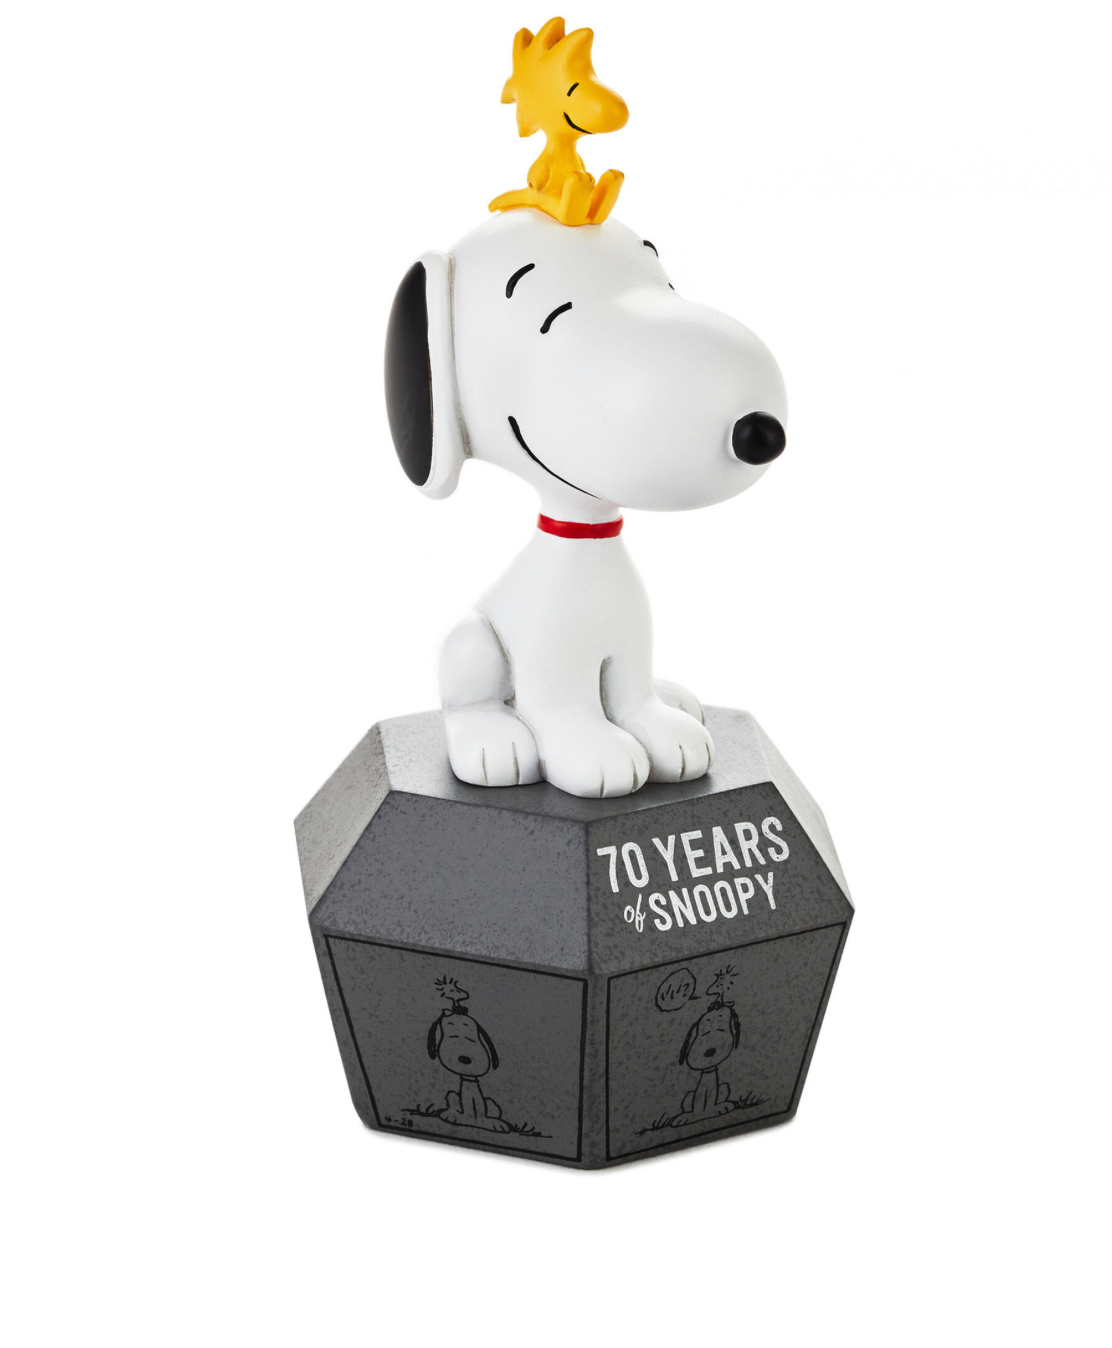 Hallmark Peanuts 70 Years of Snoopy Woodstock Limited Figurine New with Tag